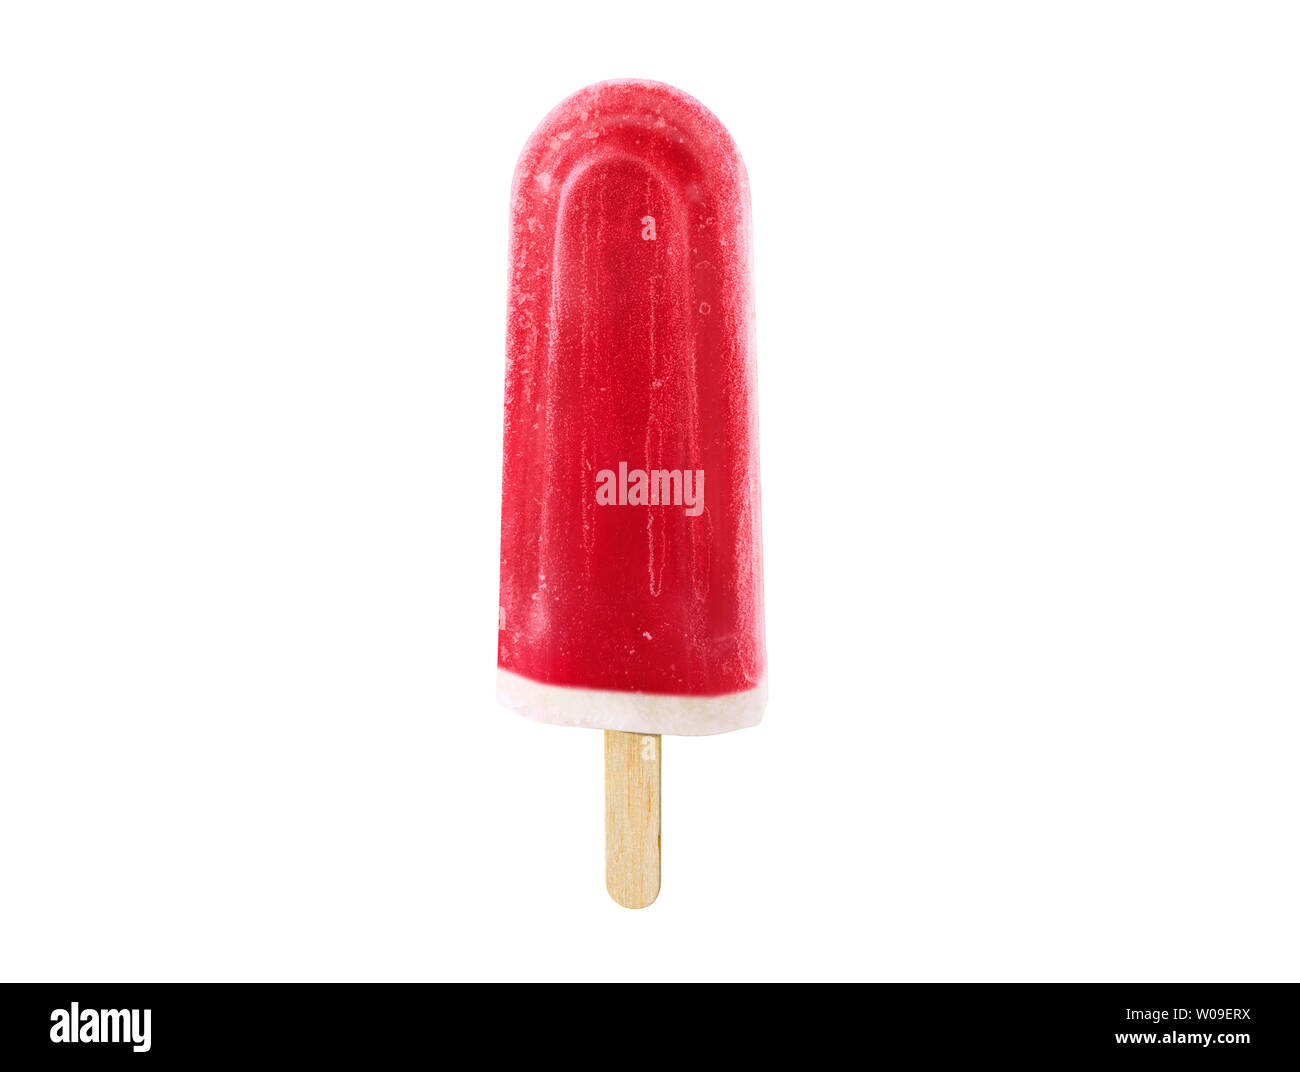 Fresh Frozen berry or grape, red popsicle / ice cream isolated on white background Stock Photo